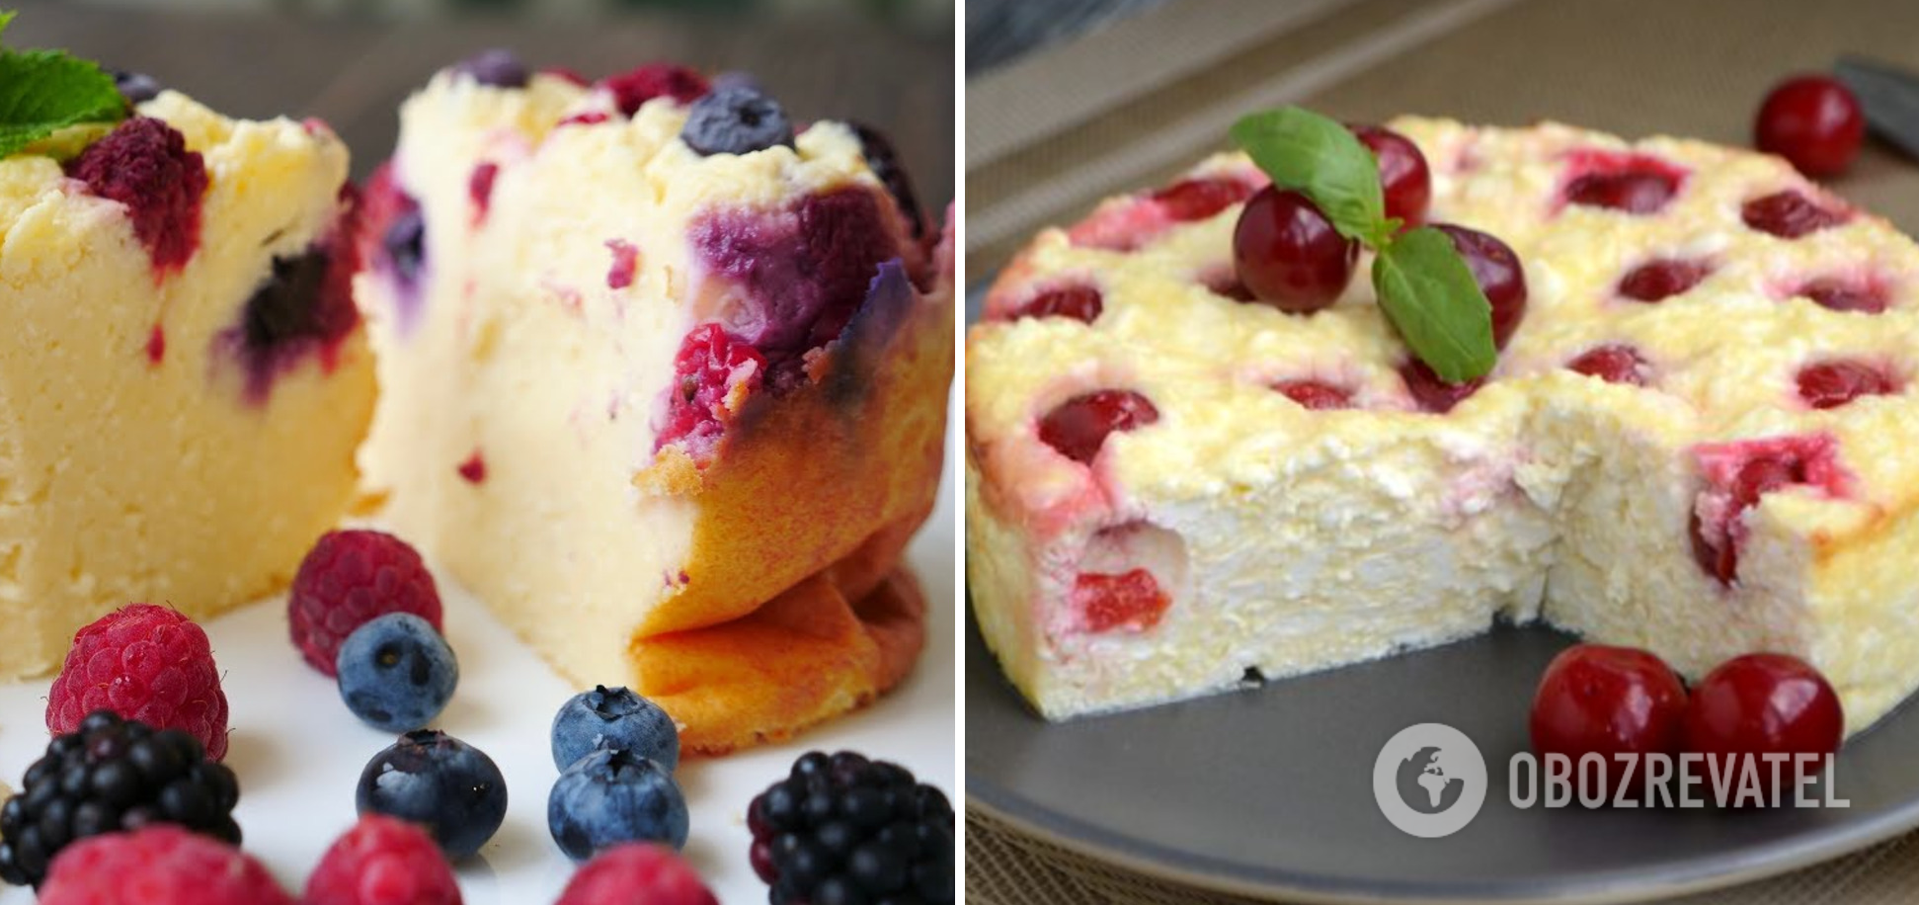 Cheese casserole with cherries and berries